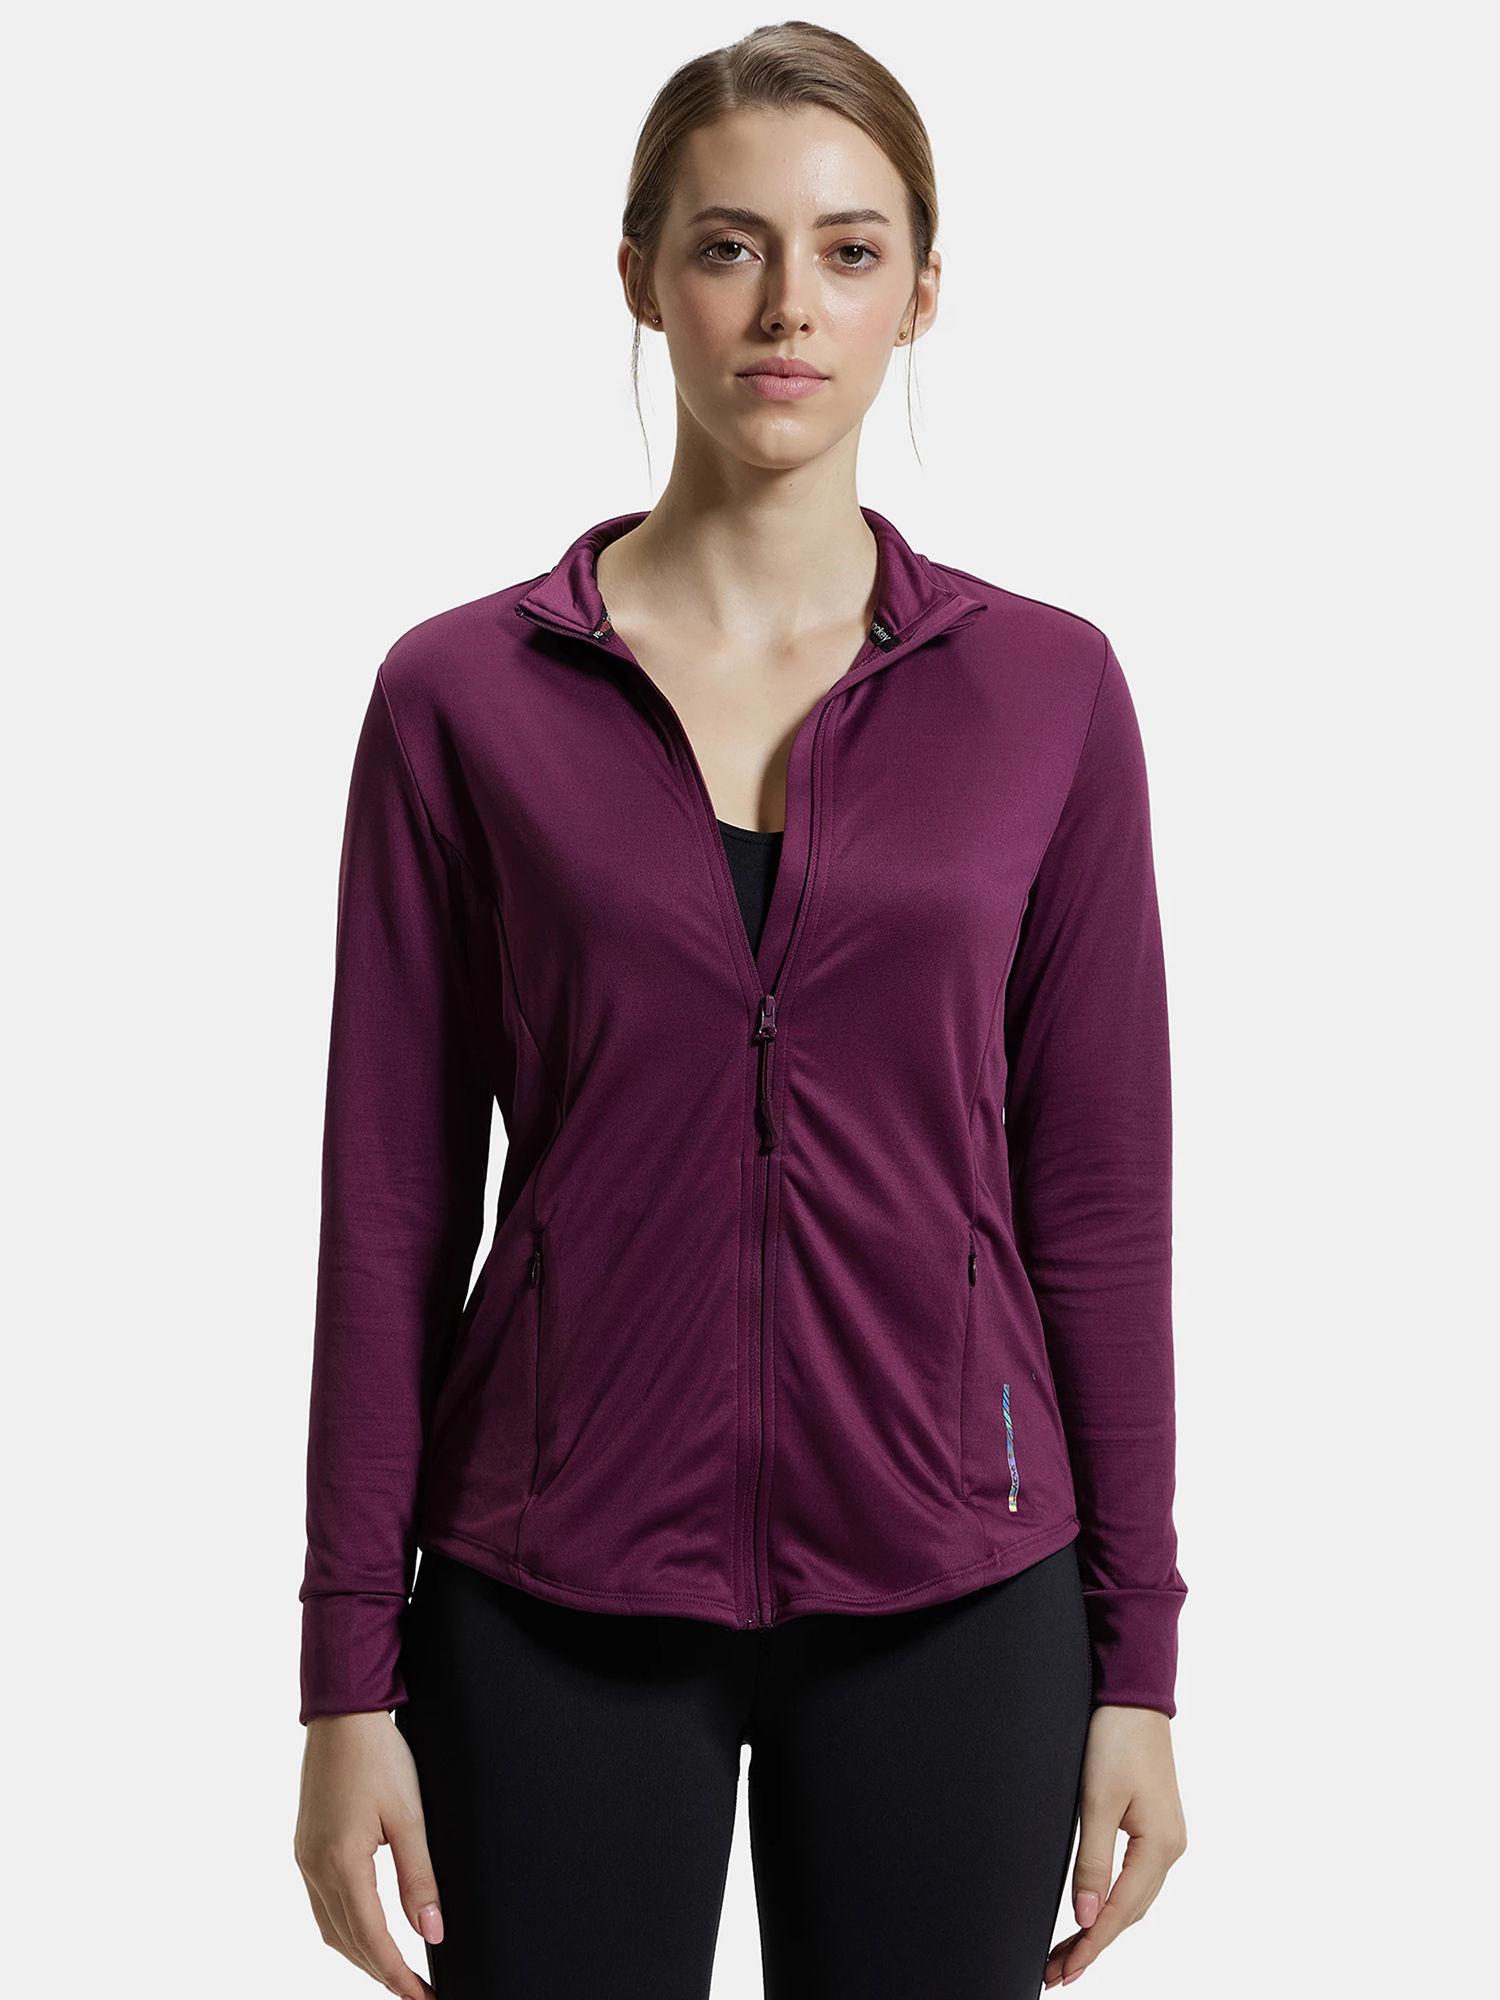 mw67 women's microfiber relaxed fit jacket with curved back hem - grape wine